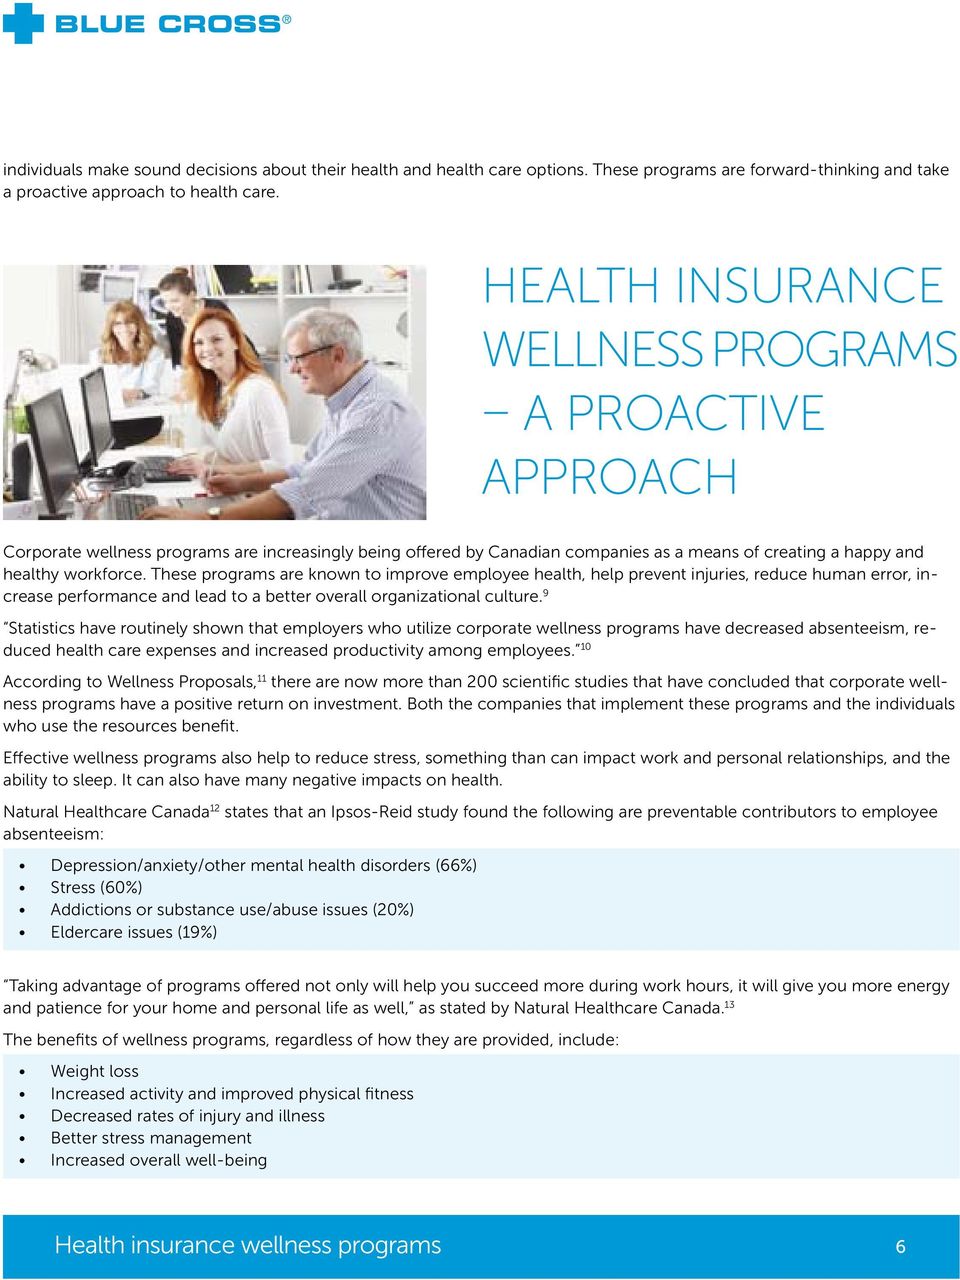 These programs are known to improve employee health, help prevent injuries, reduce human error, increase performance and lead to a better overall organizational culture.